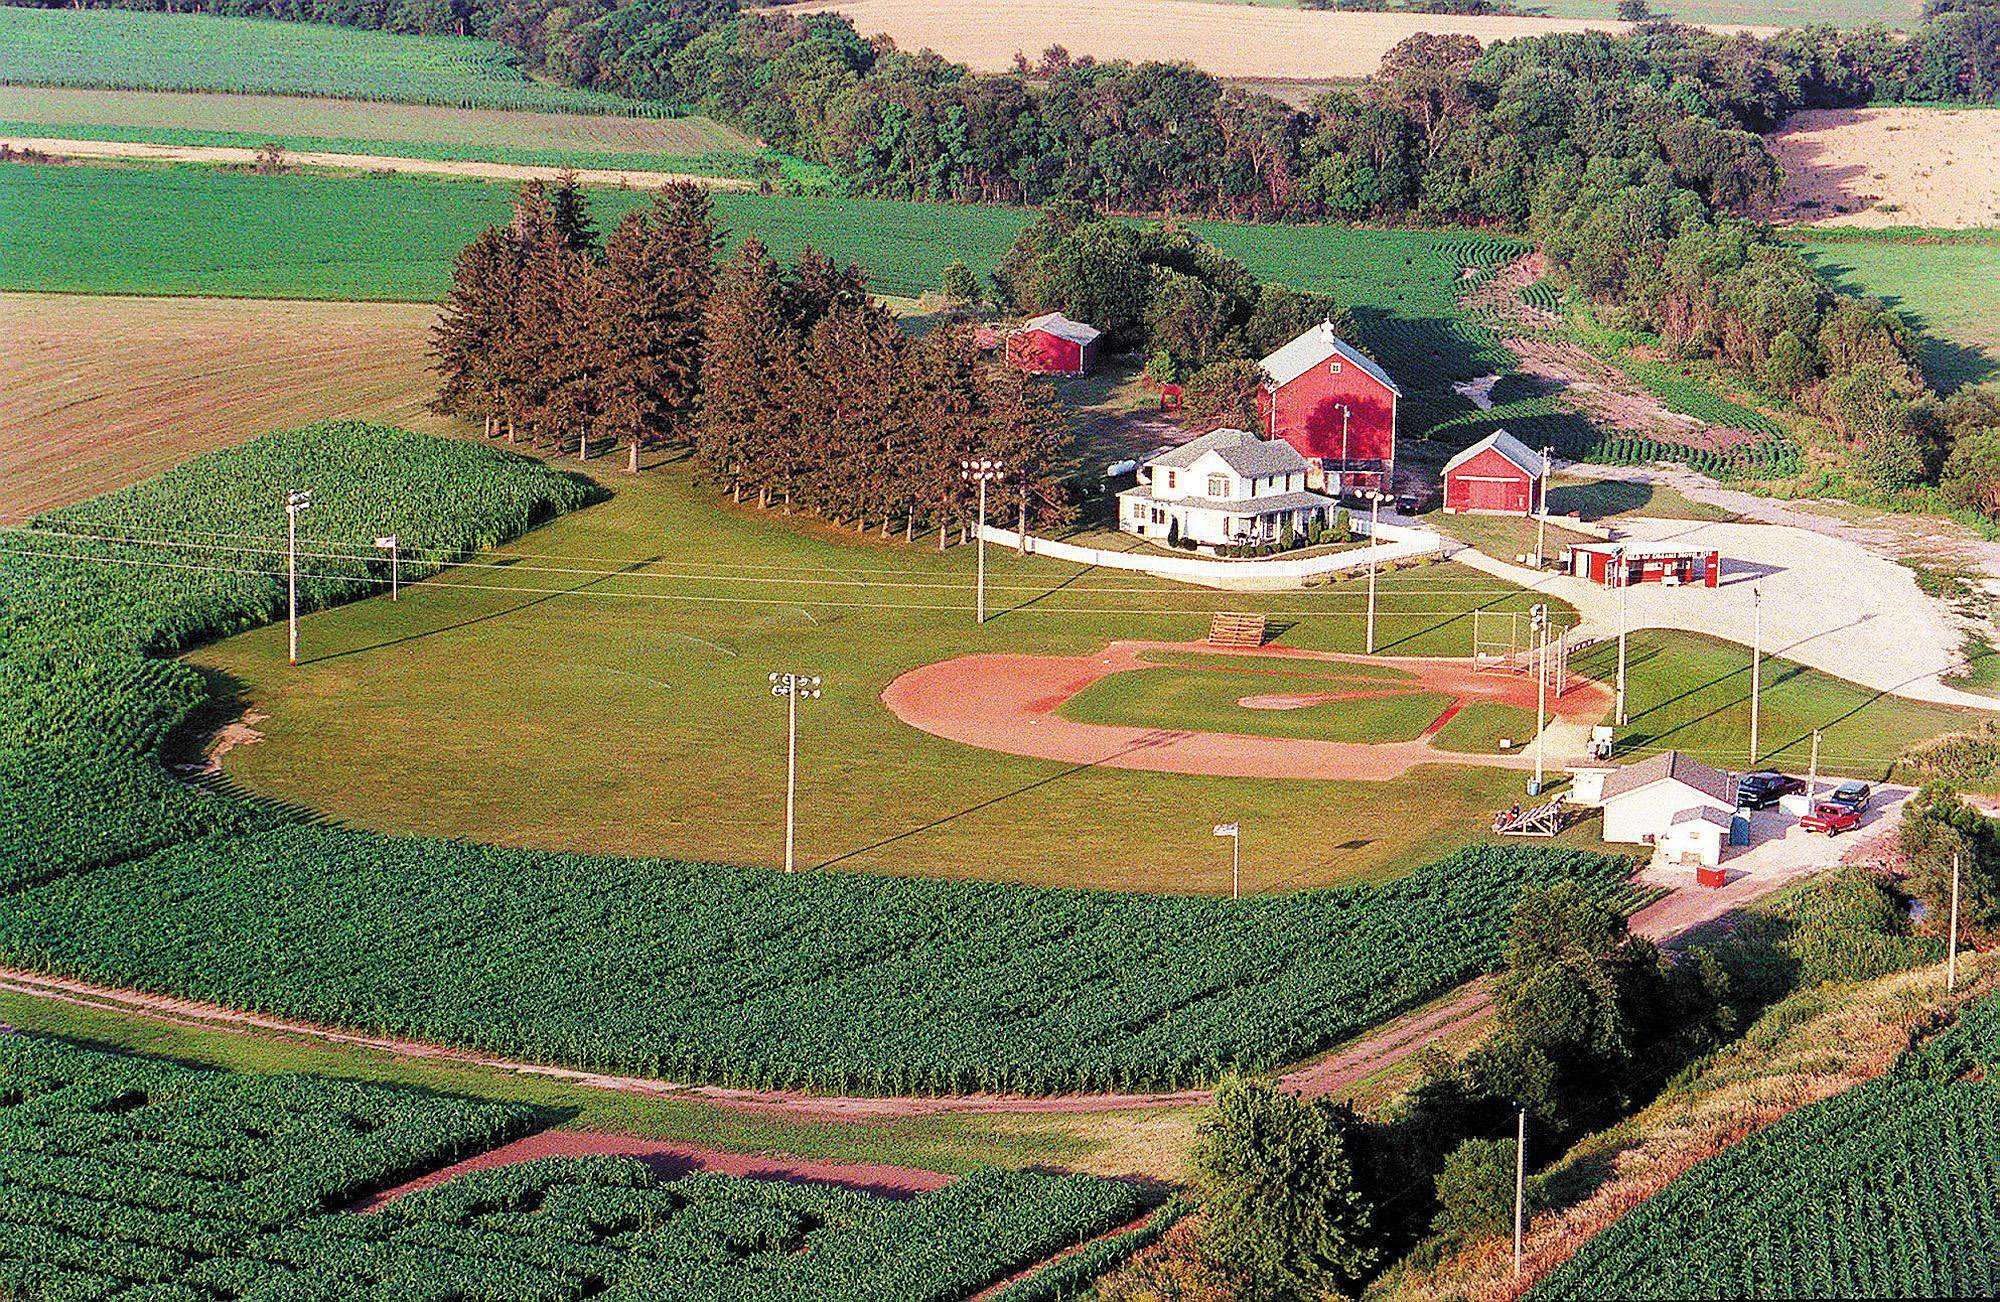 Field of Dreams' Game: Yankees, White Sox set to play at Iowa movie site 